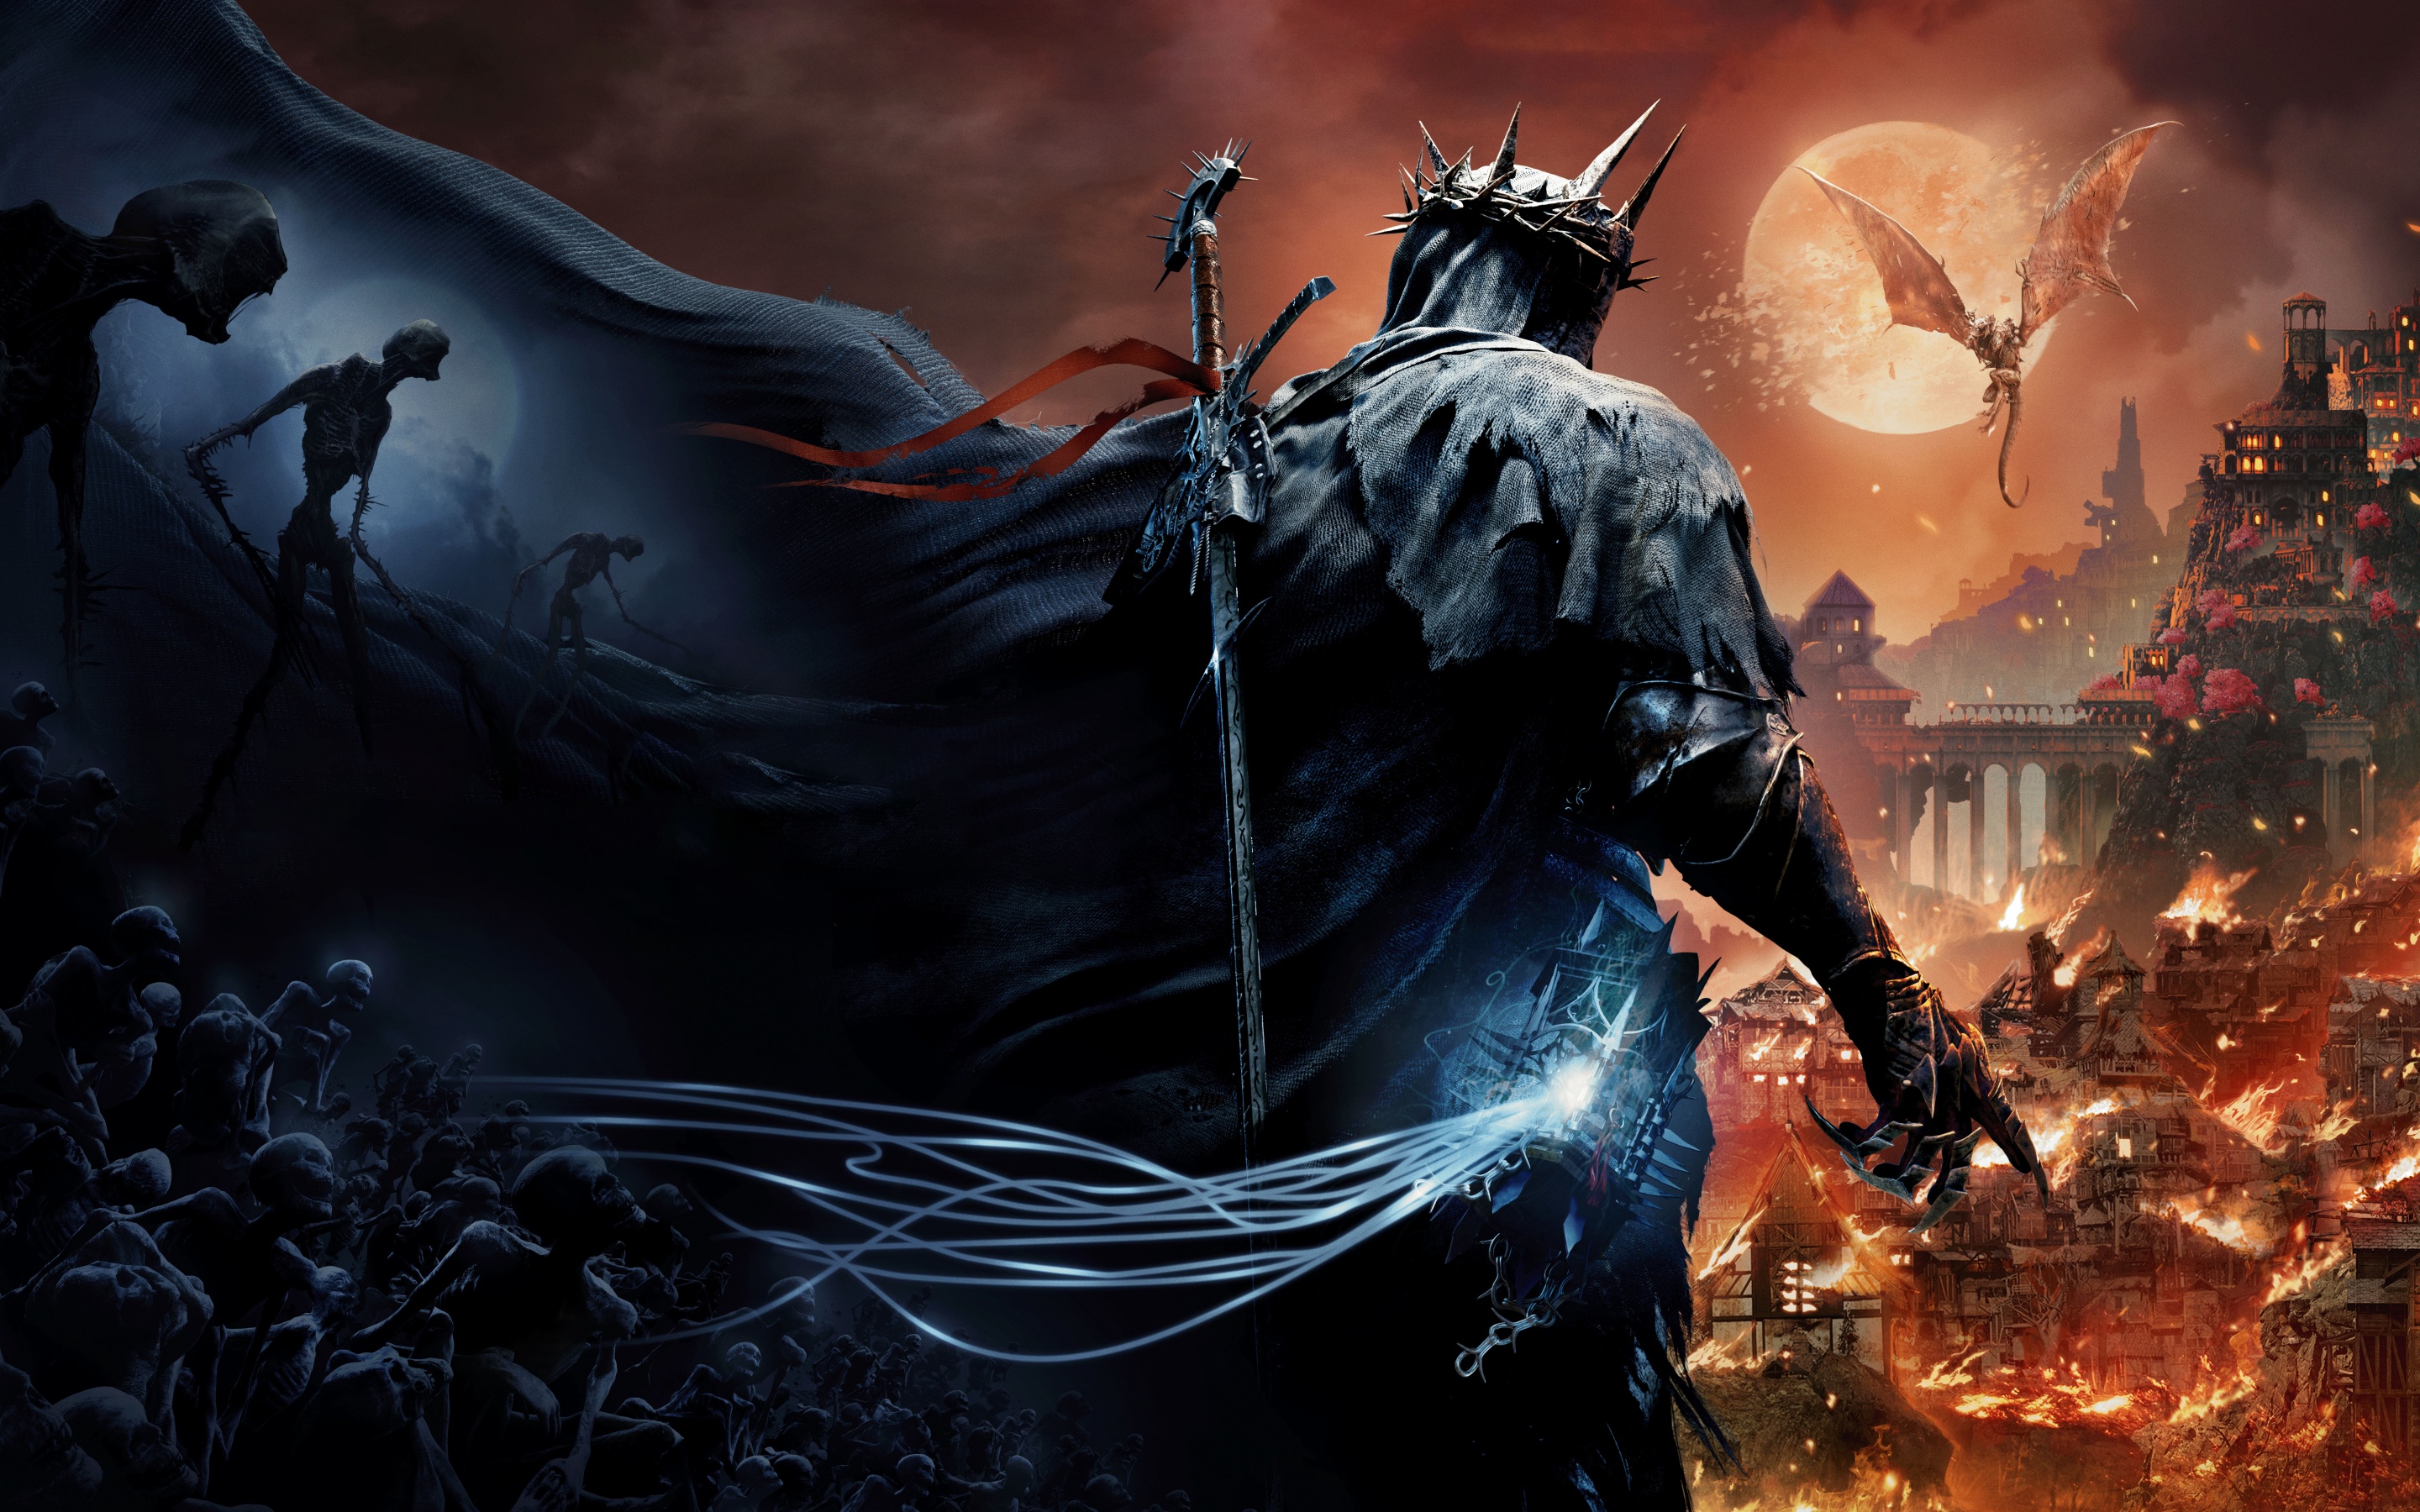 Lords of the Fallen для PS5